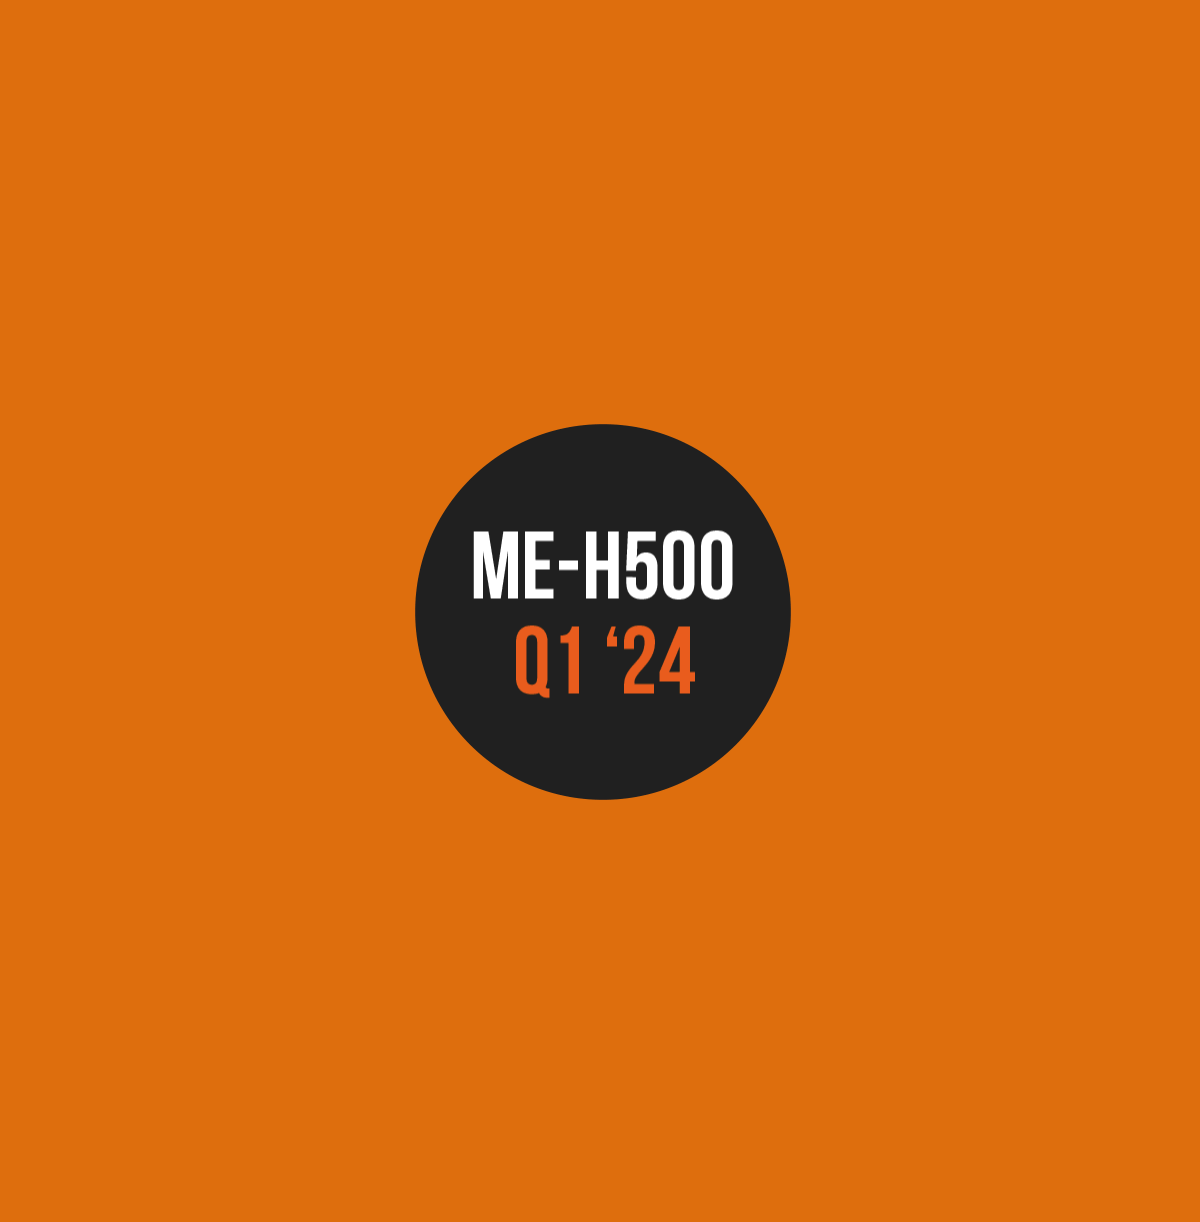 Available Q1 24: ME-H500